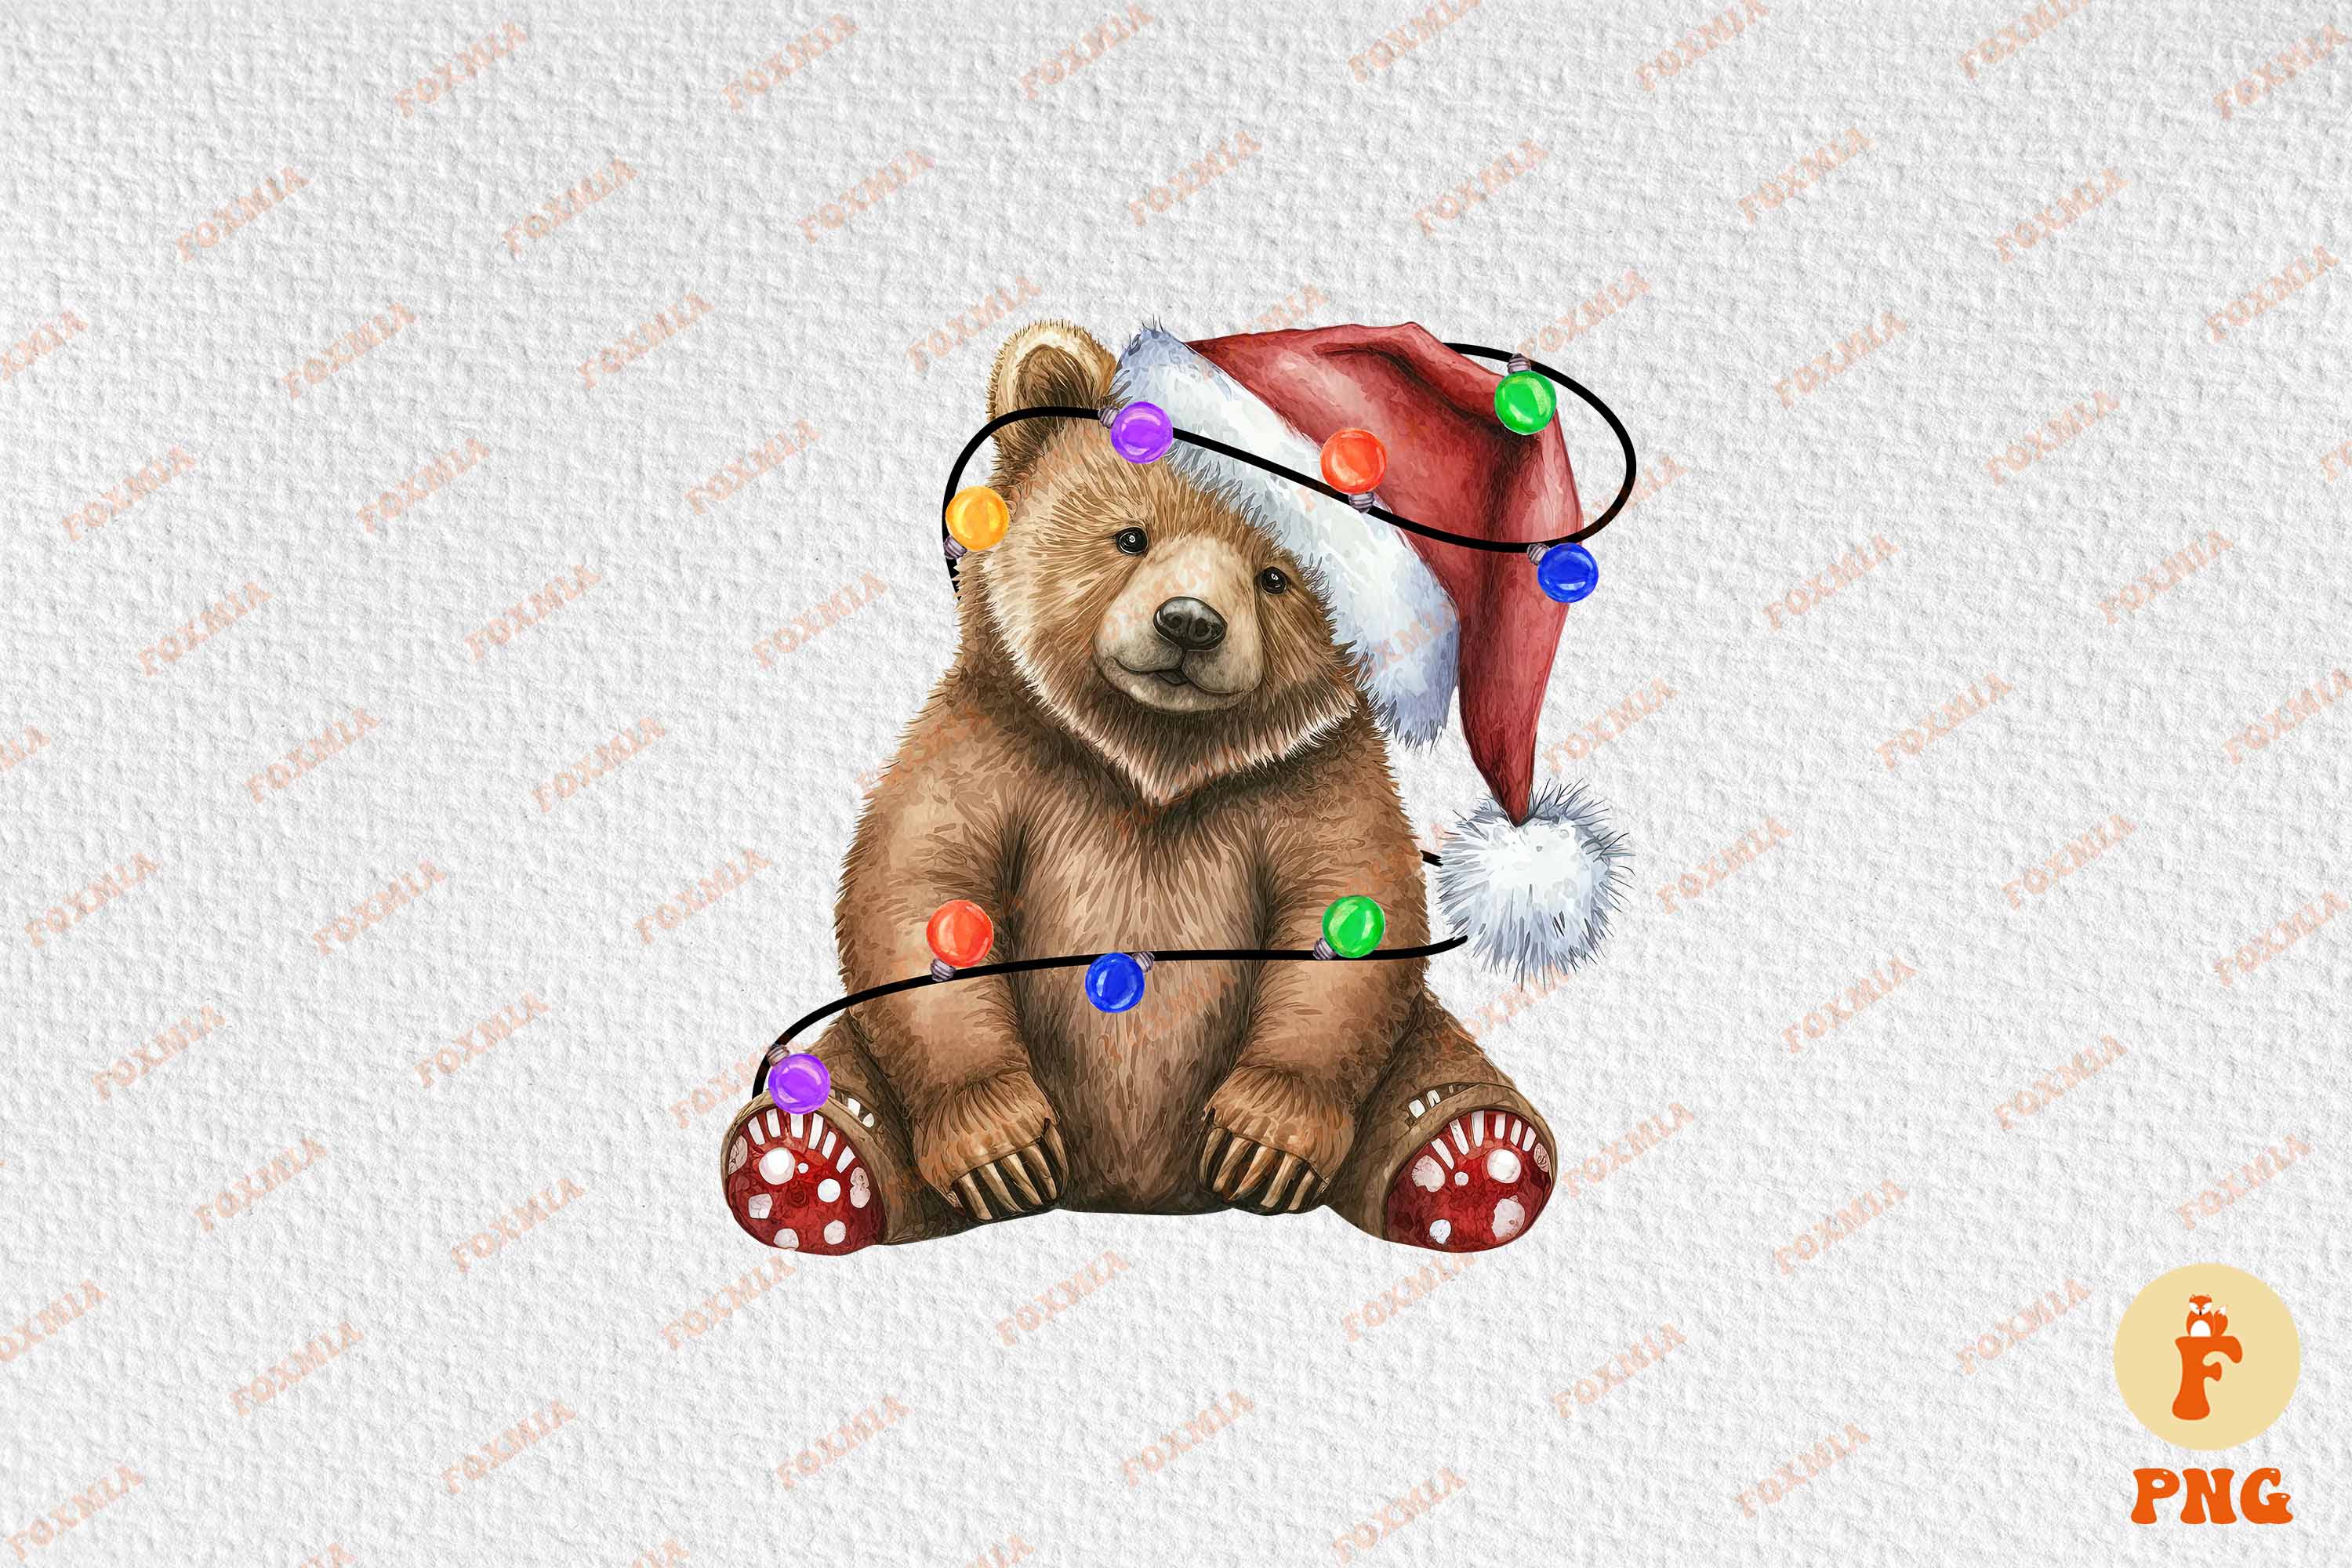 Exquisite image of a bear wearing a santa hat.